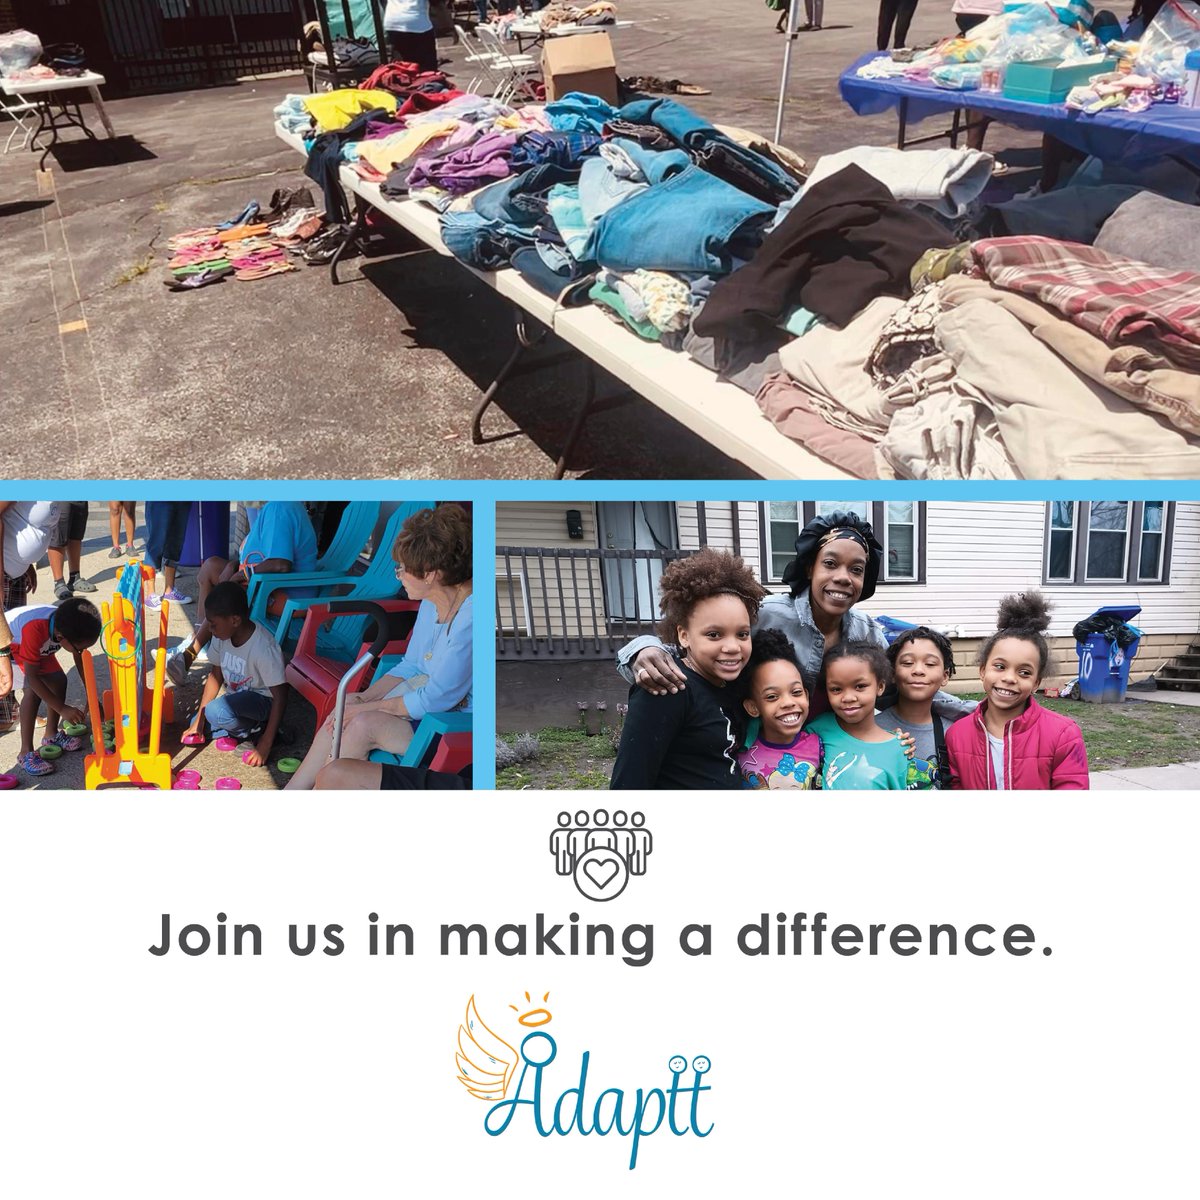 Adaptt Rochester is a non-profit organization founded and run by women with careers in social services looking to positively impact their communities. Adaptt’s mission is to provide support for homeless and at-risk women and children in the Greater Rochester community. Donate ...